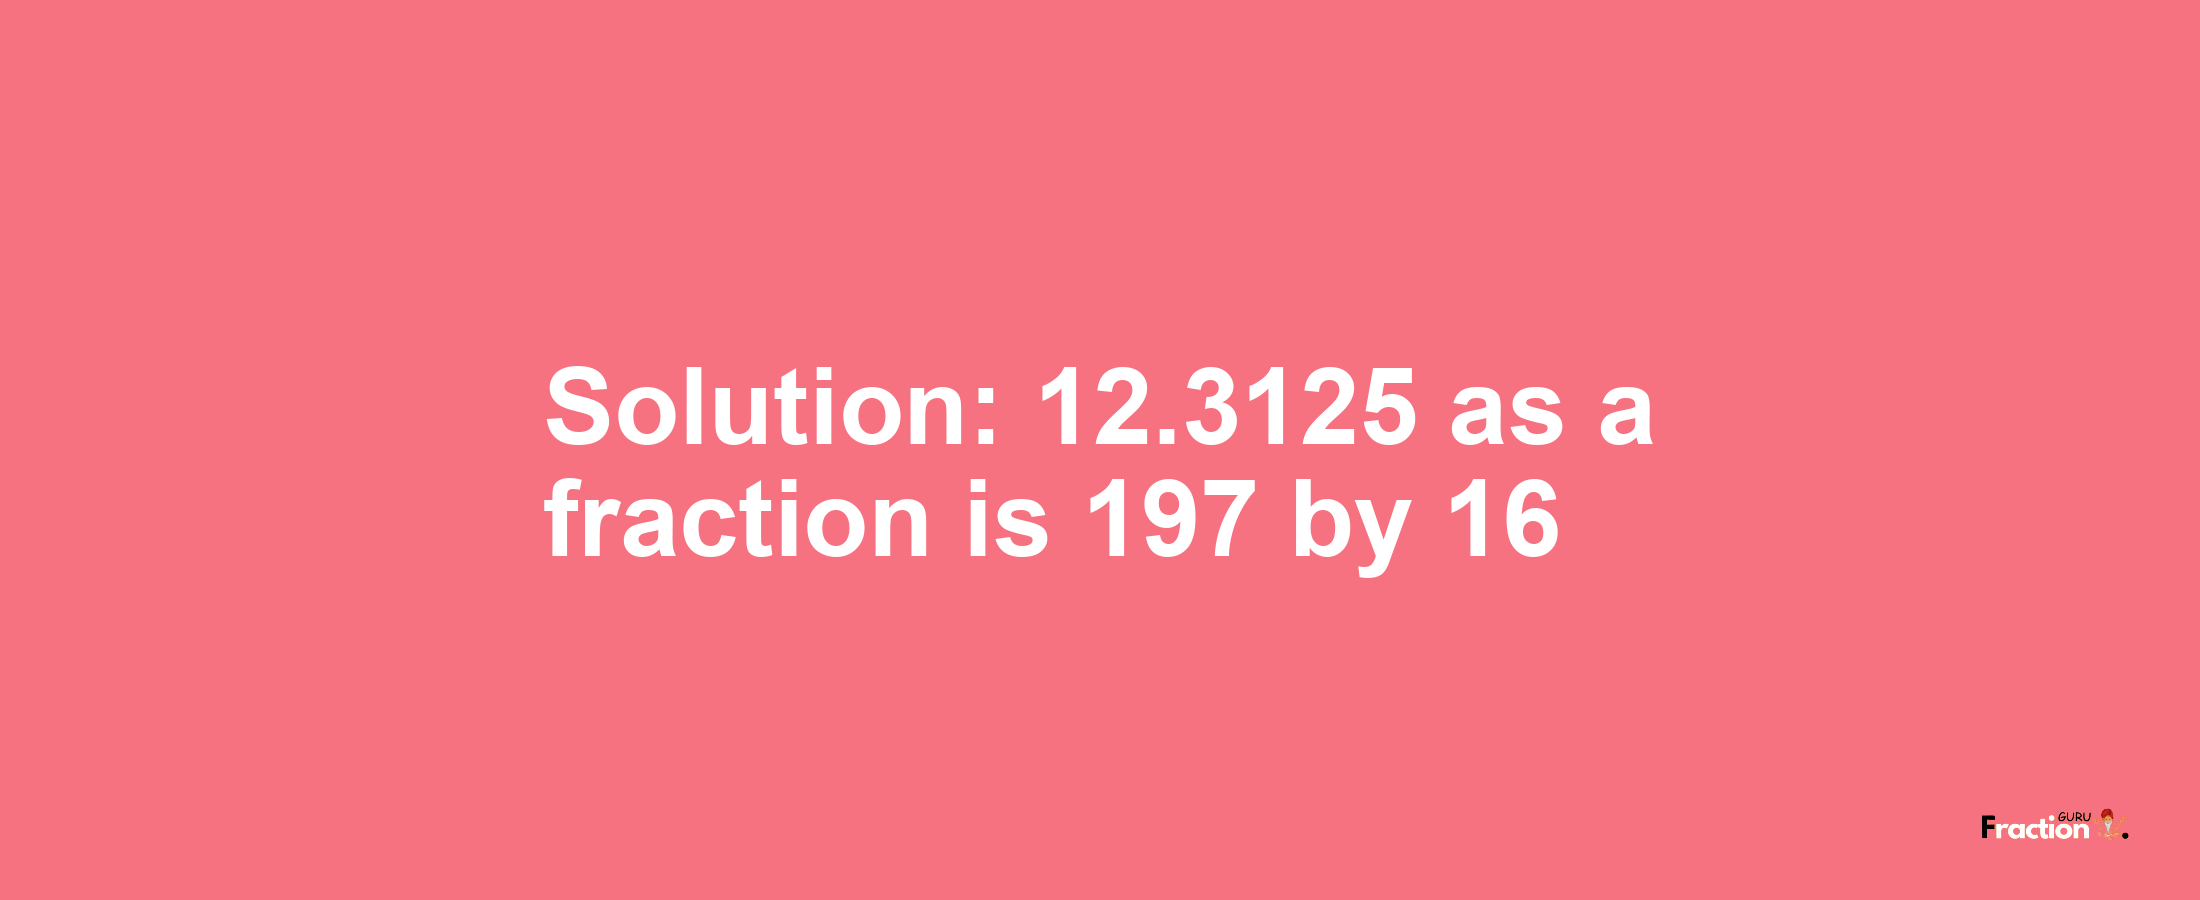 Solution:12.3125 as a fraction is 197/16